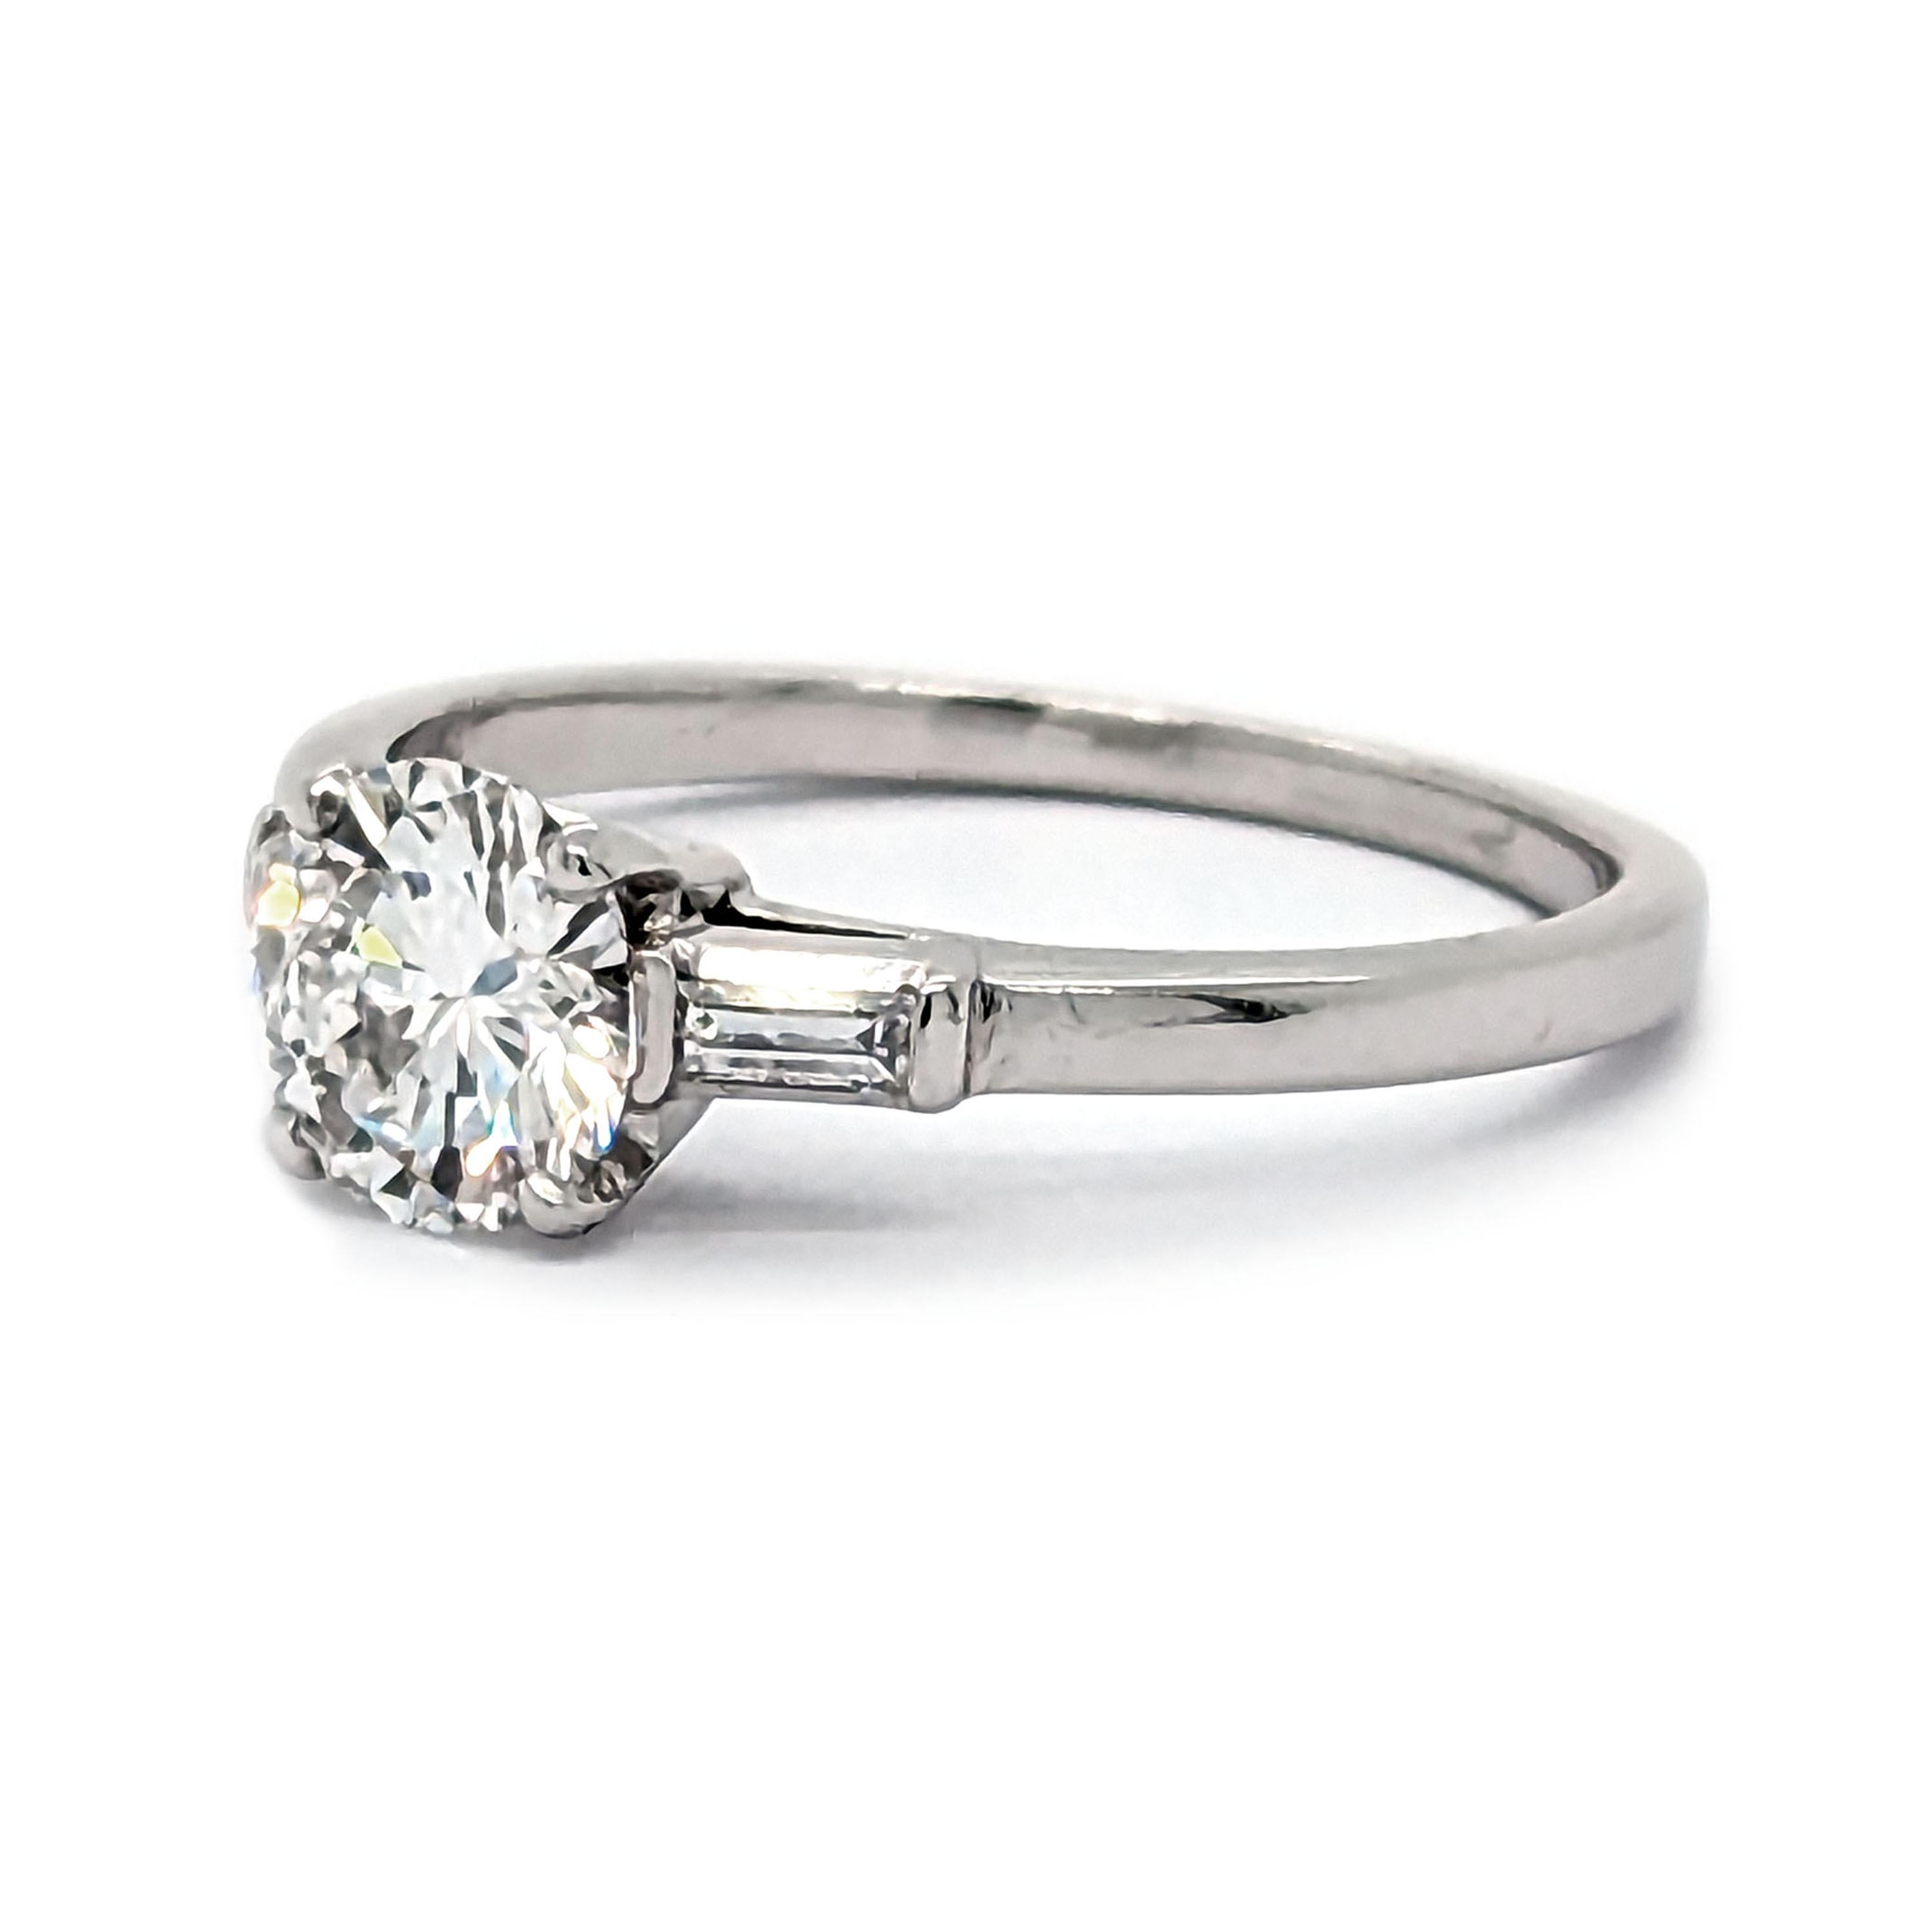 Vintage Solitaire Diamond and Platinum Ring, 0.81 Carats, Circa 1940 In Good Condition For Sale In London, GB